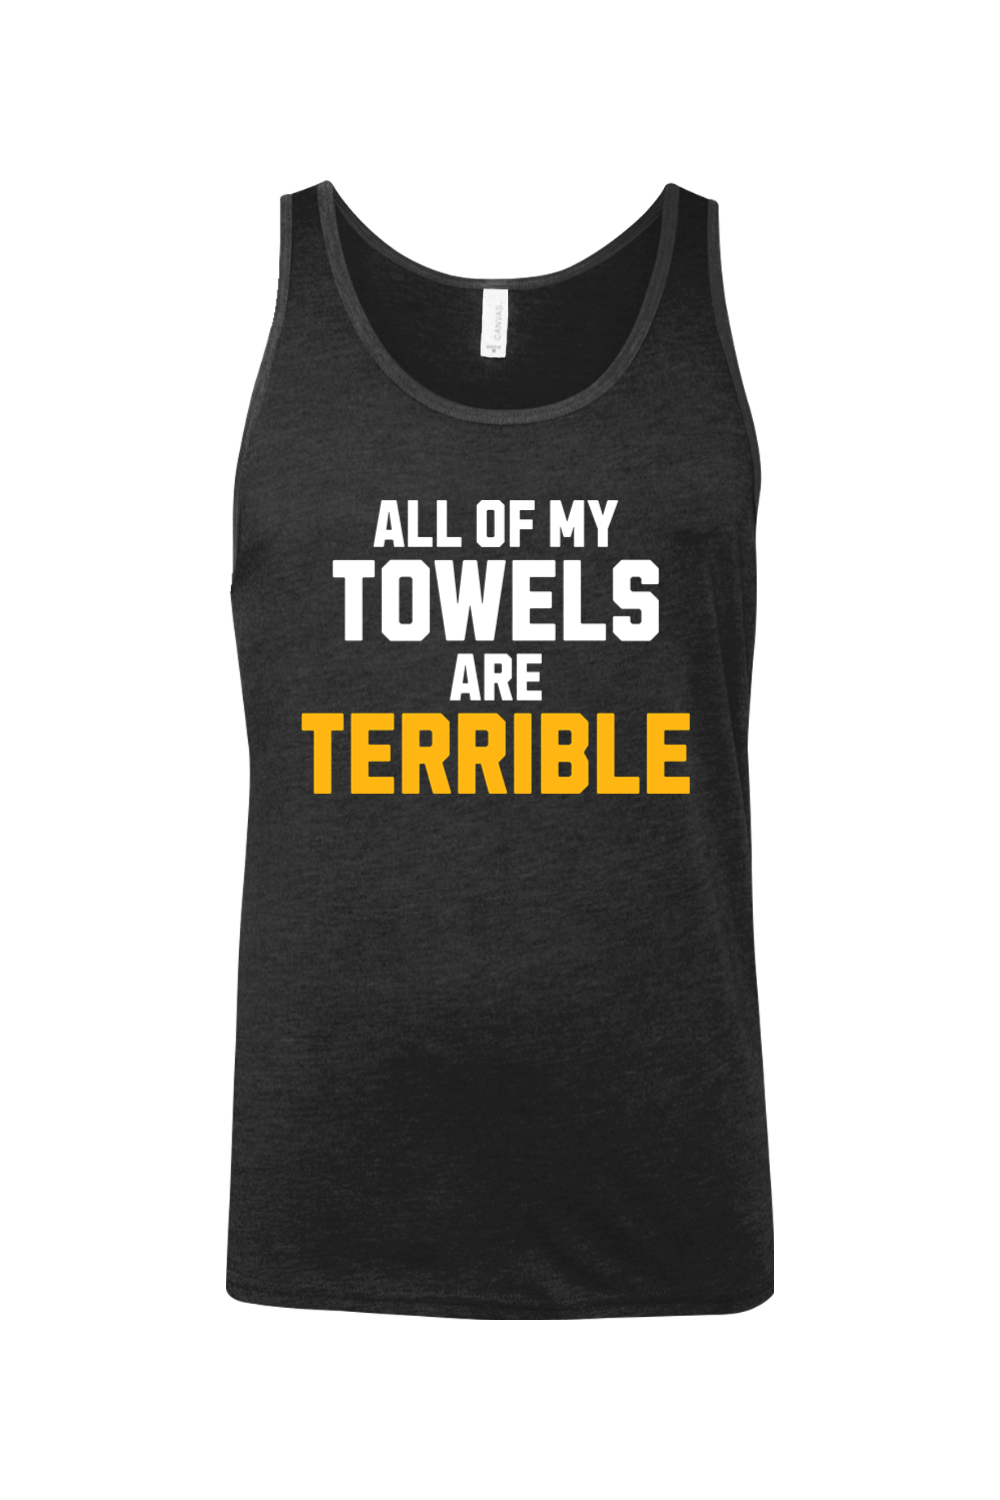 All of My Towels are Terrible - Men's Tank Top - Yinzylvania